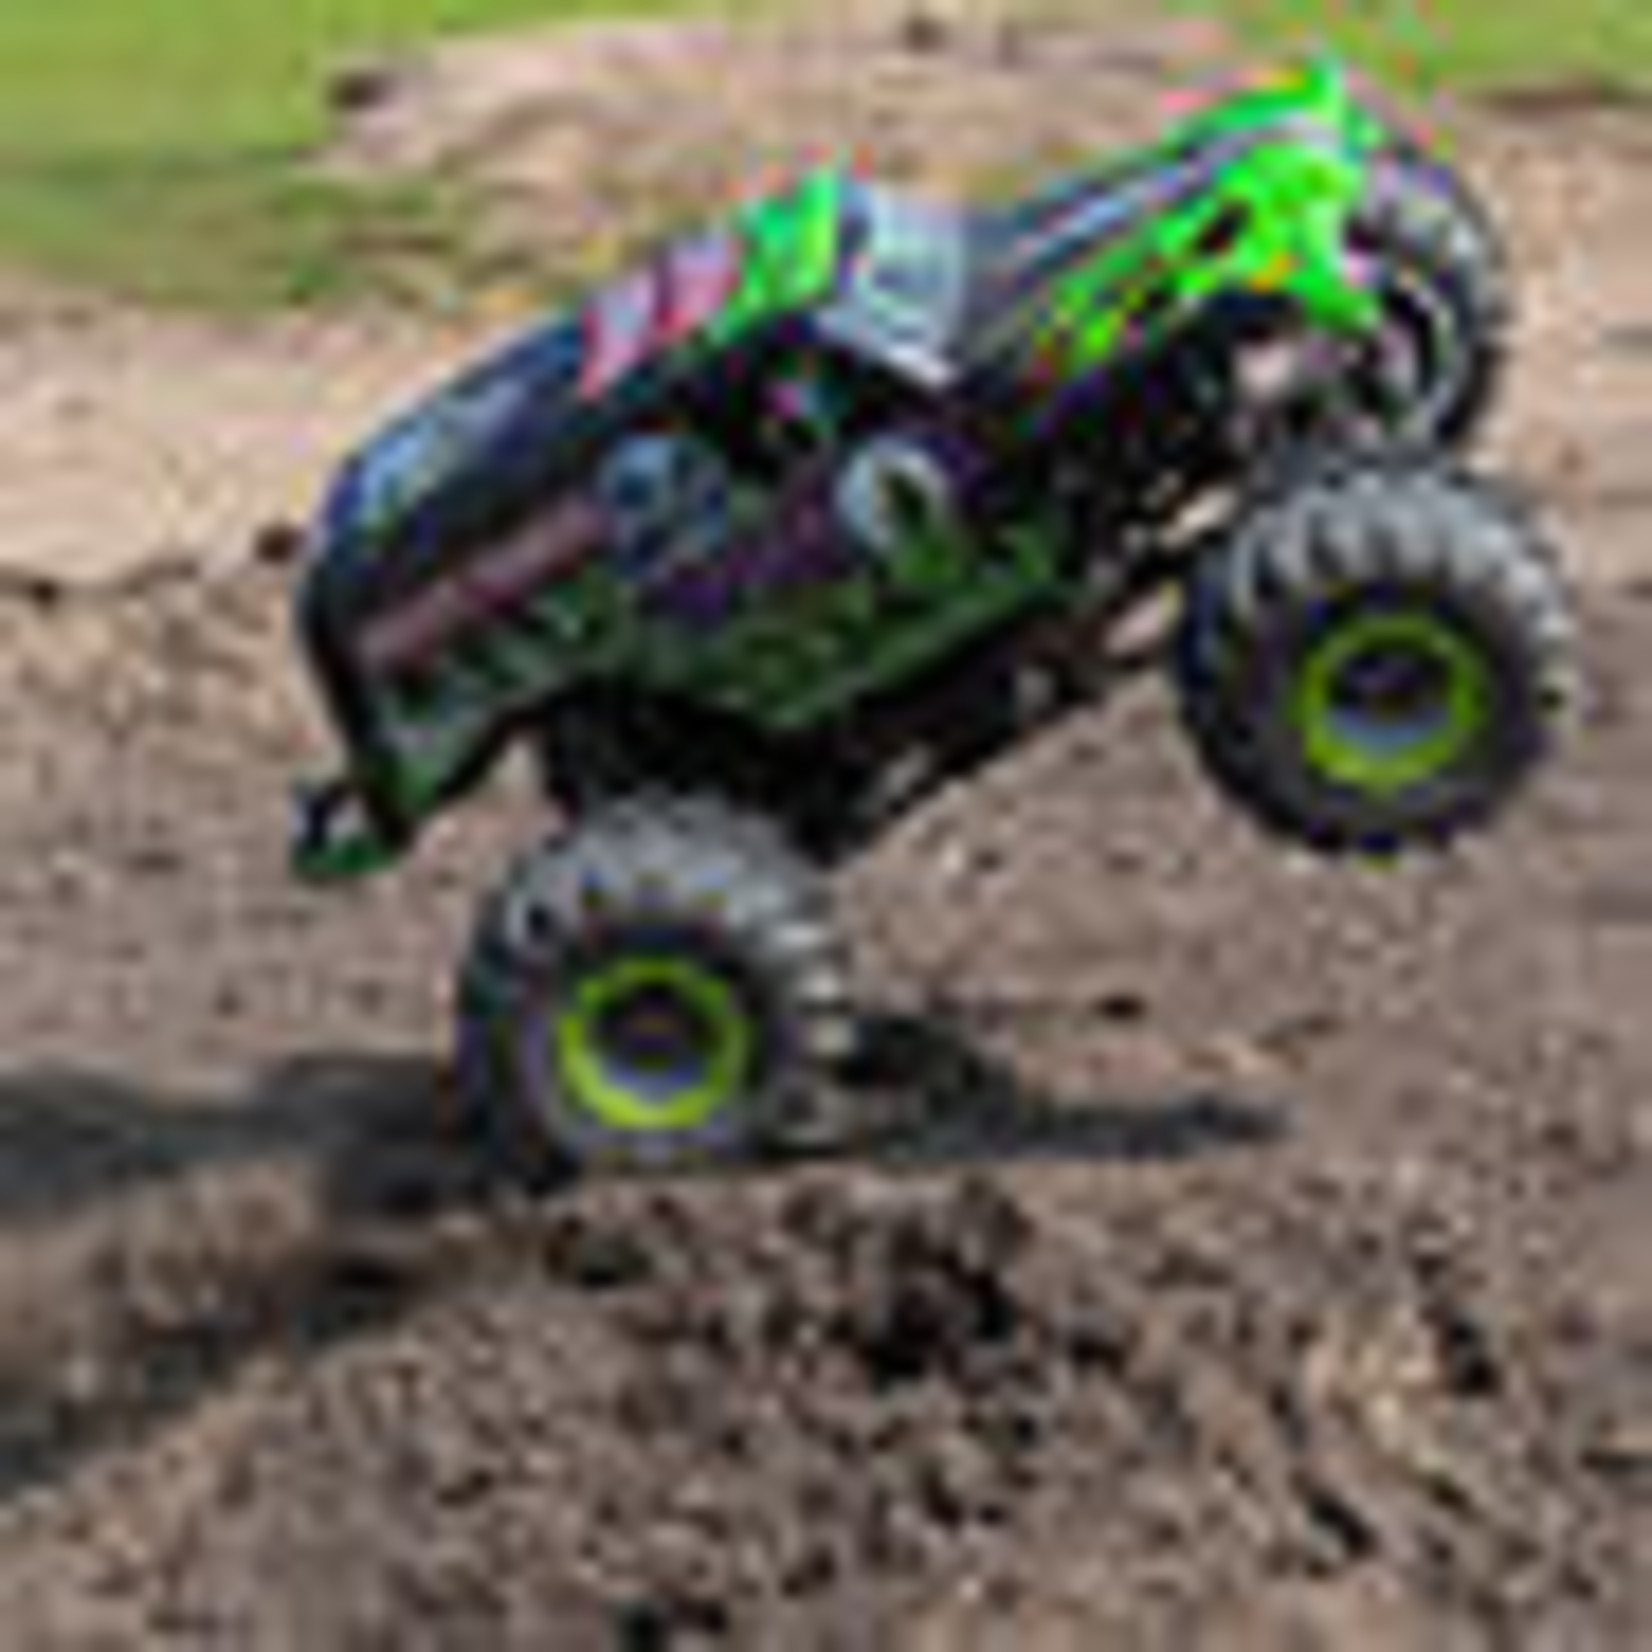 Losi LMT:4wd Solid Axle Monster Truck, Grave Digger:RTR